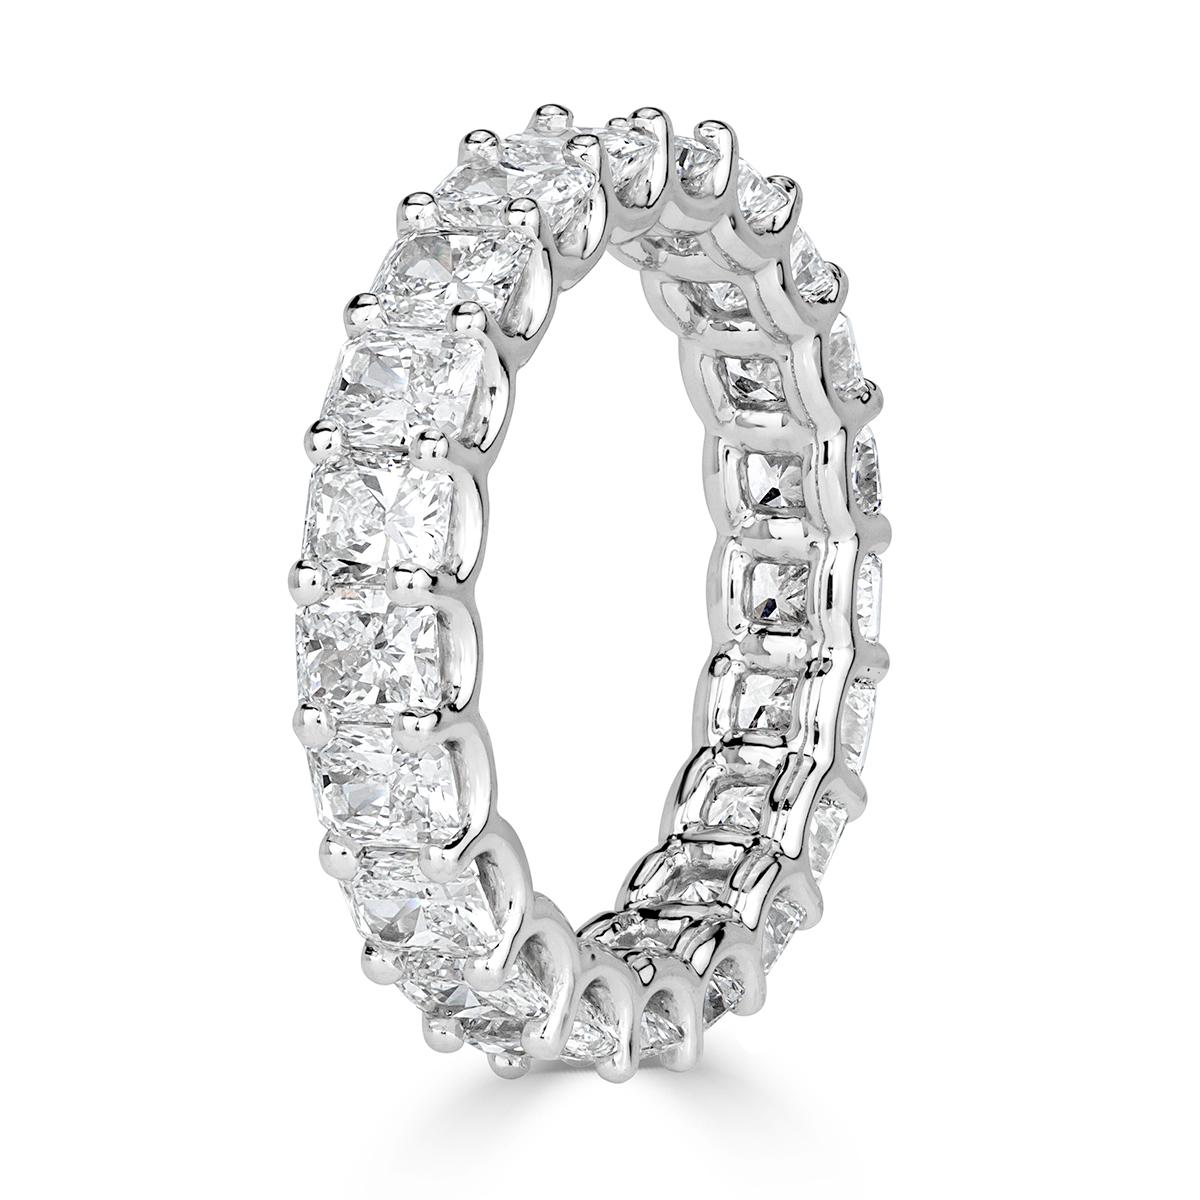 This gorgeous diamond eternity band features 4.14ct of radiant cut diamonds graded at E-F, VS1-VS2. They are set in a custom, 18k white gold 